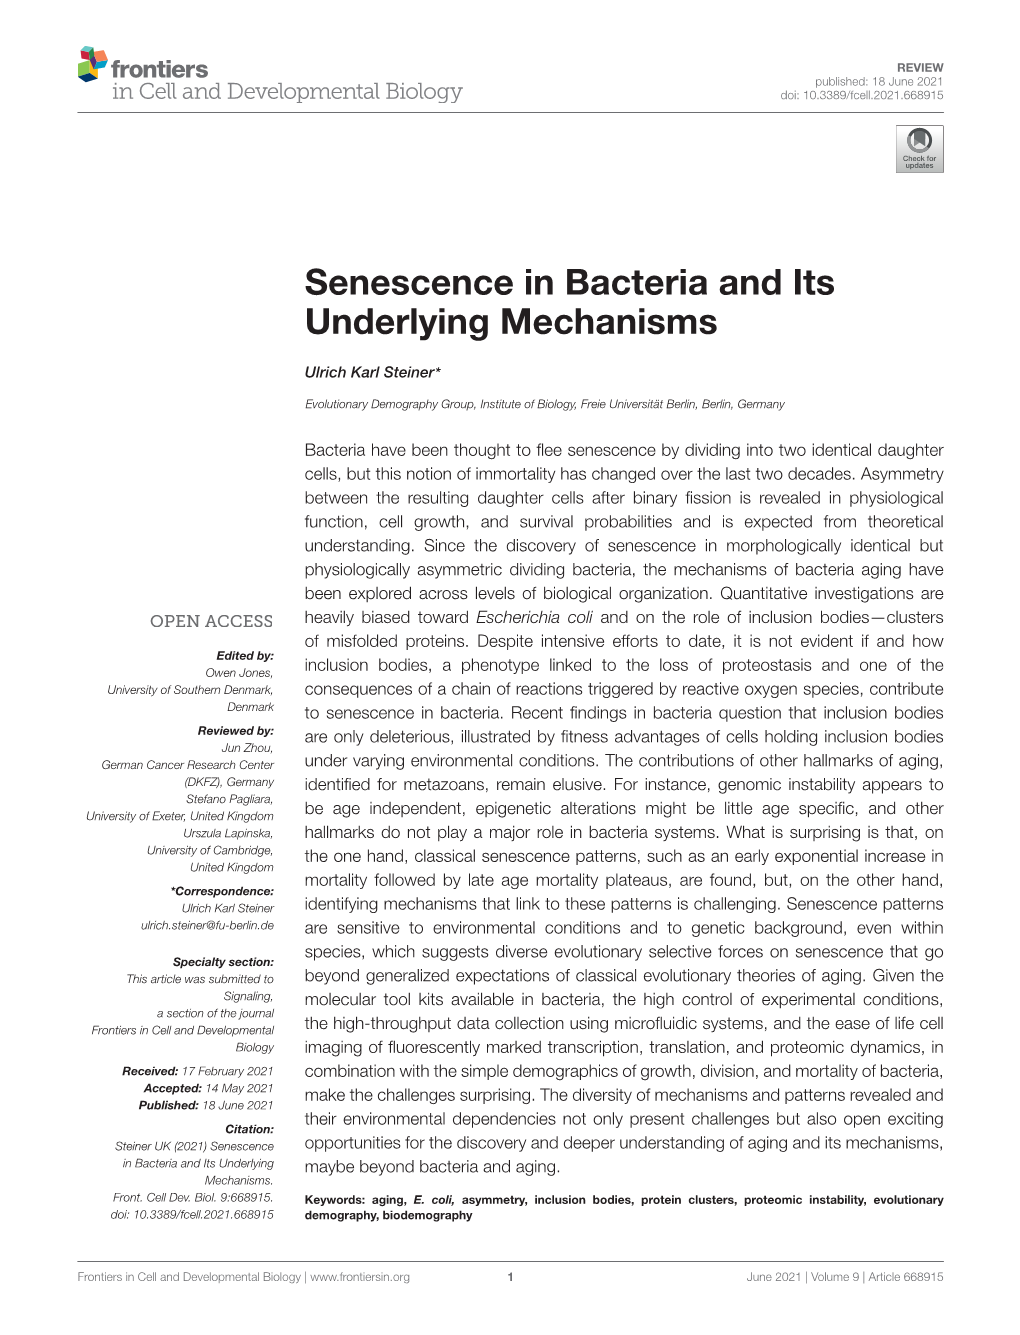 Senescence in Bacteria and Its Underlying Mechanisms